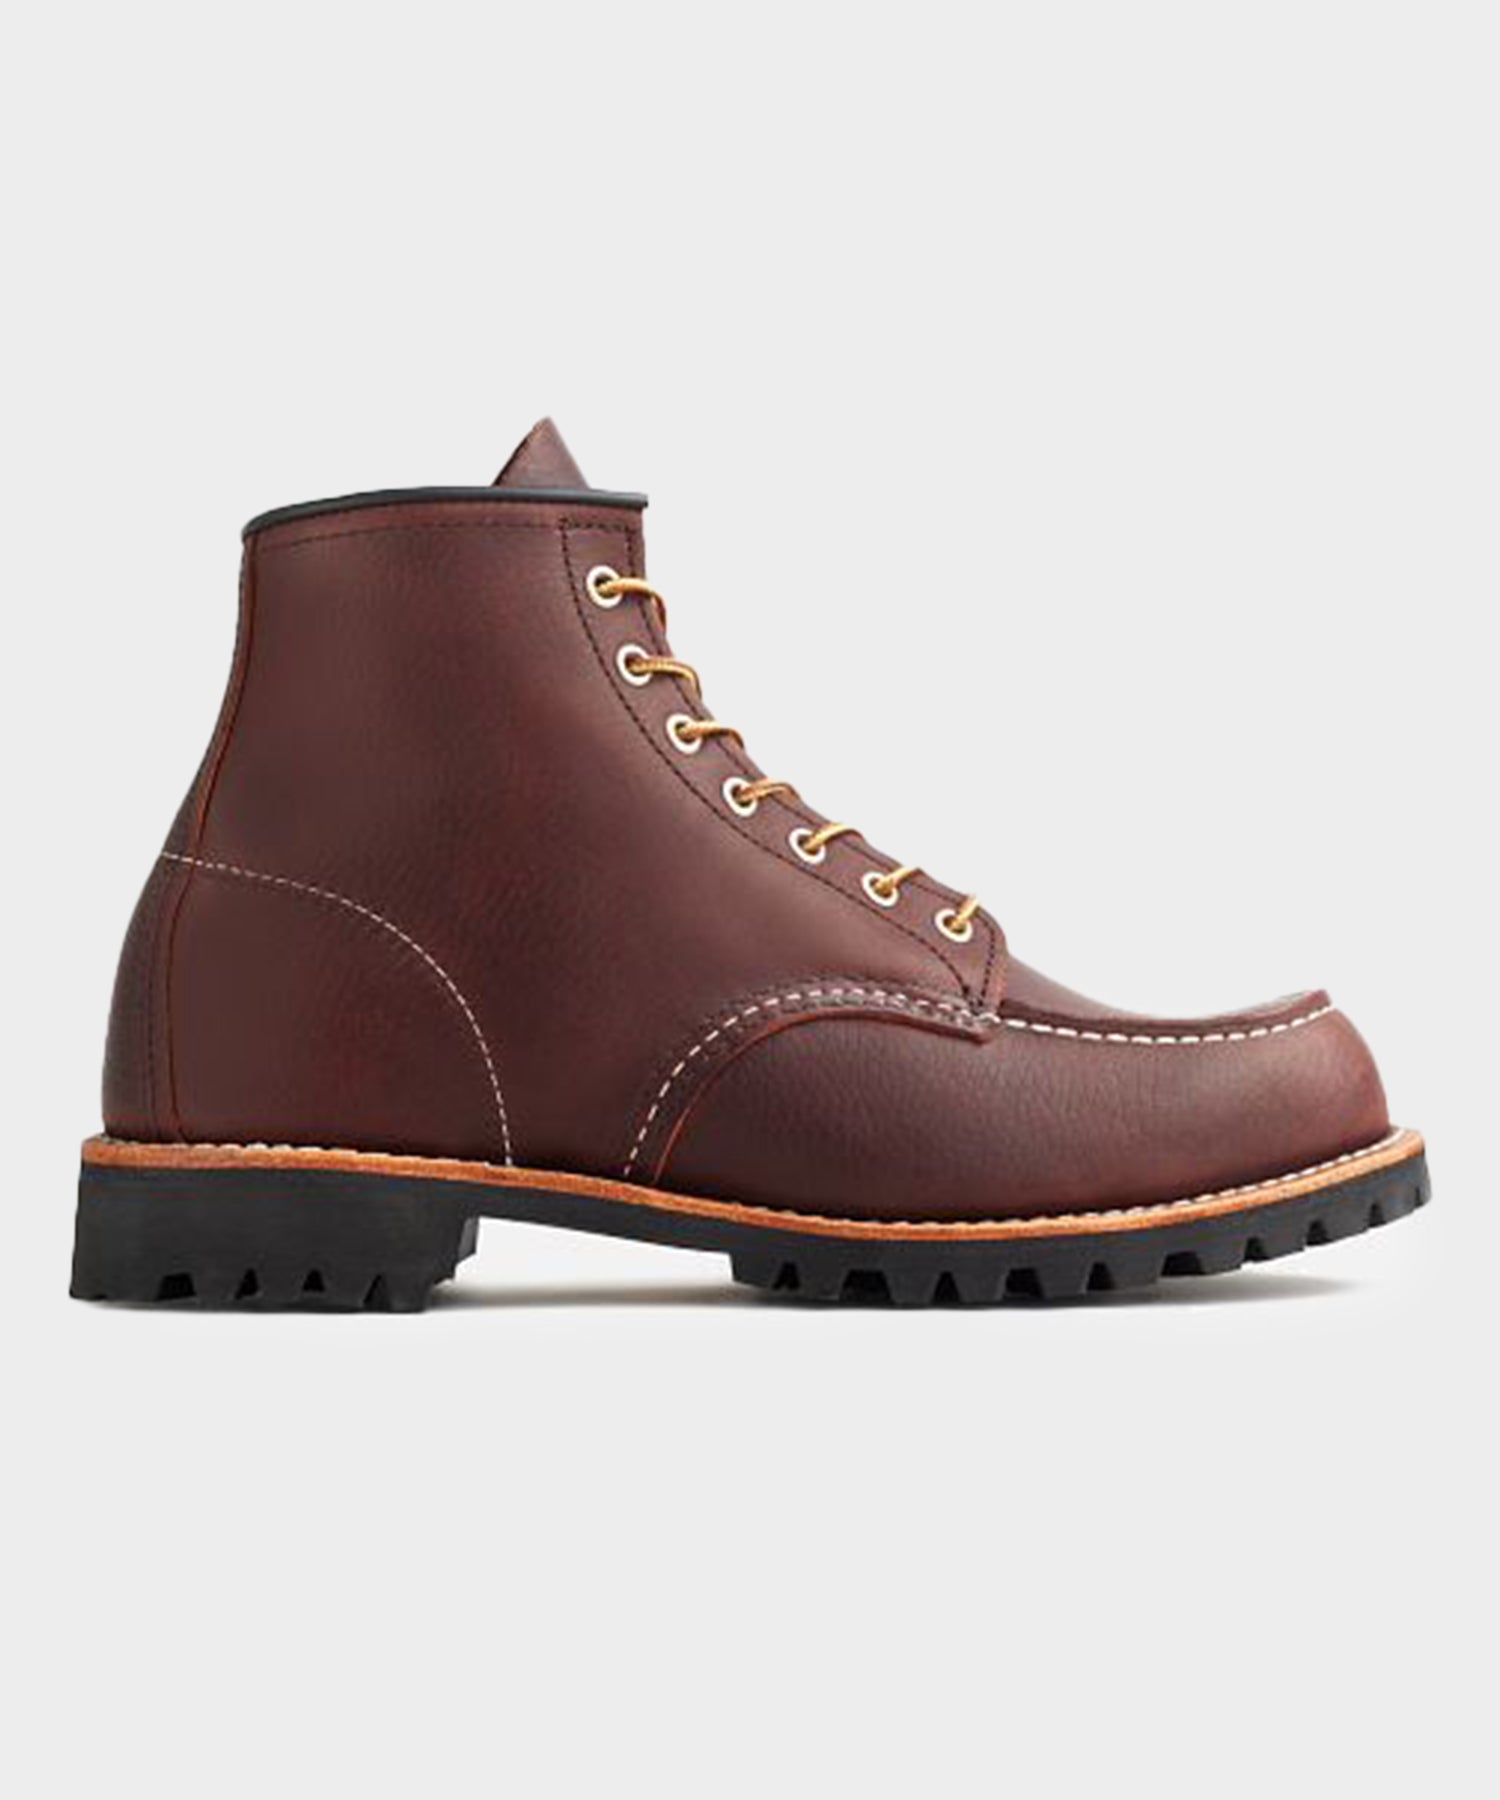 Red Wing Roughneck 6-in Boot in Briar